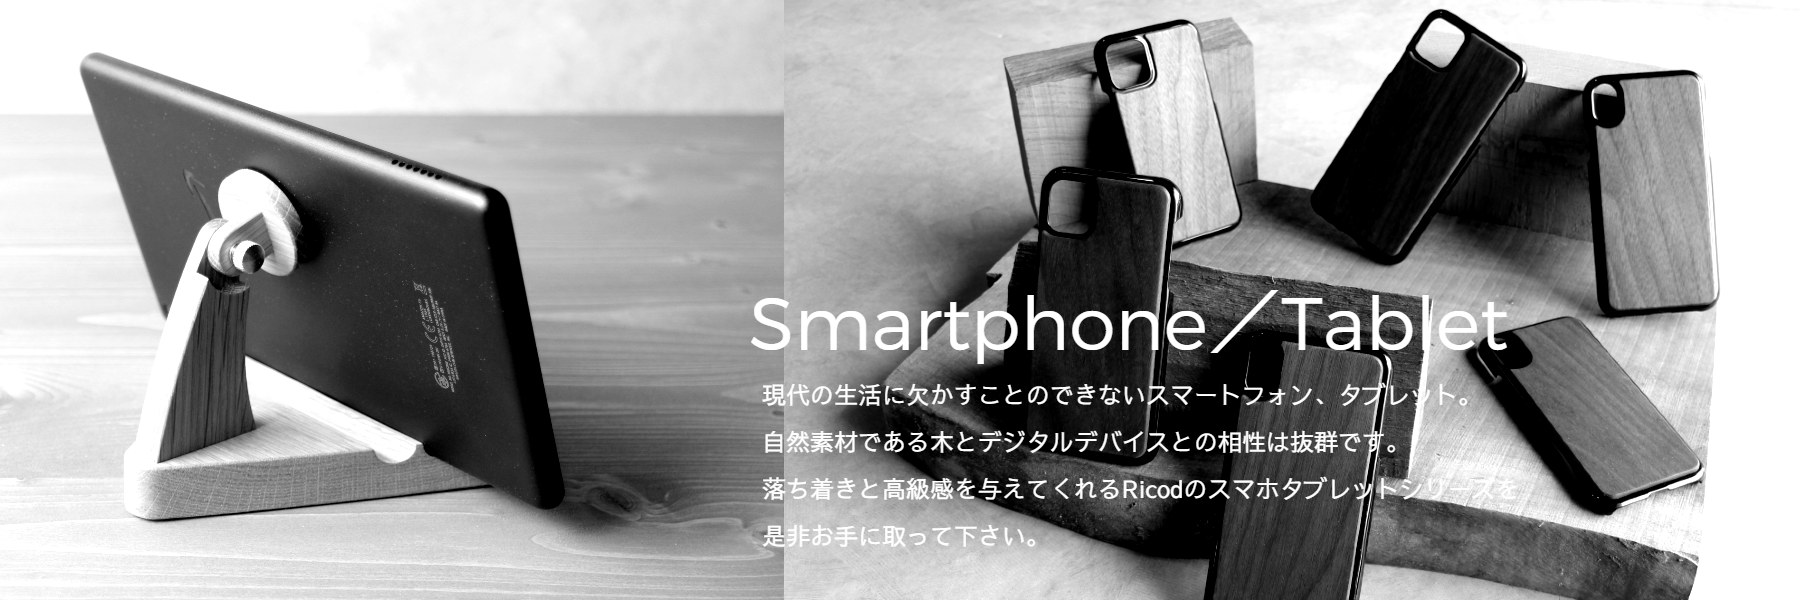 Smartphone／Tablet（スマホ・タブレット・PC）